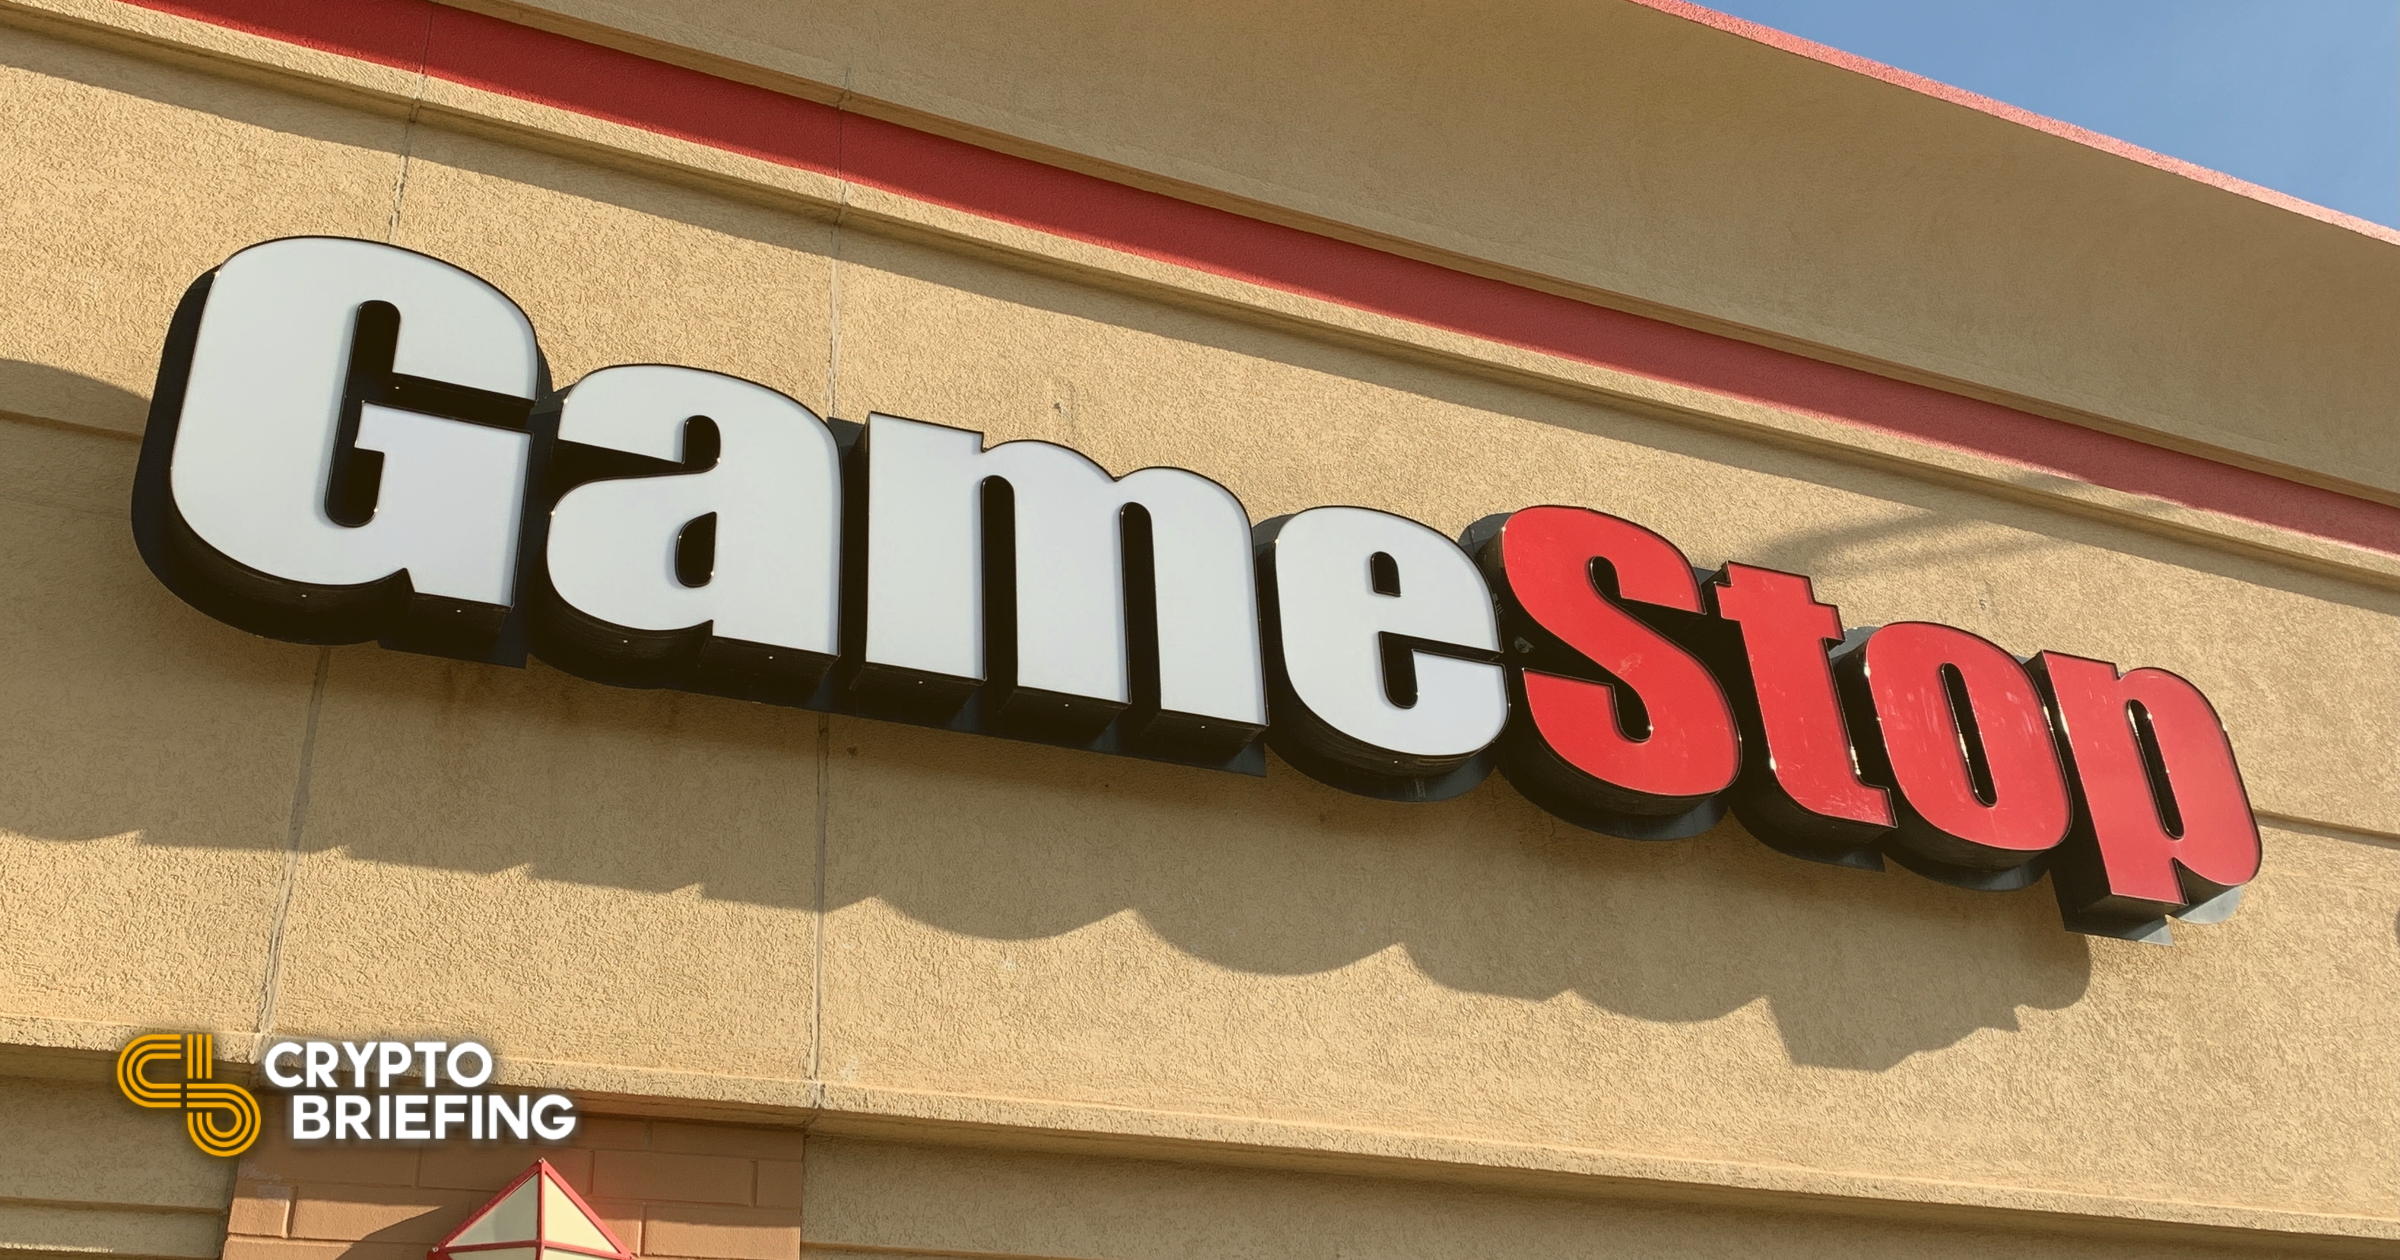 gamestop-job-listing-hints-at-crypto-or-nft-project-crypto-briefing